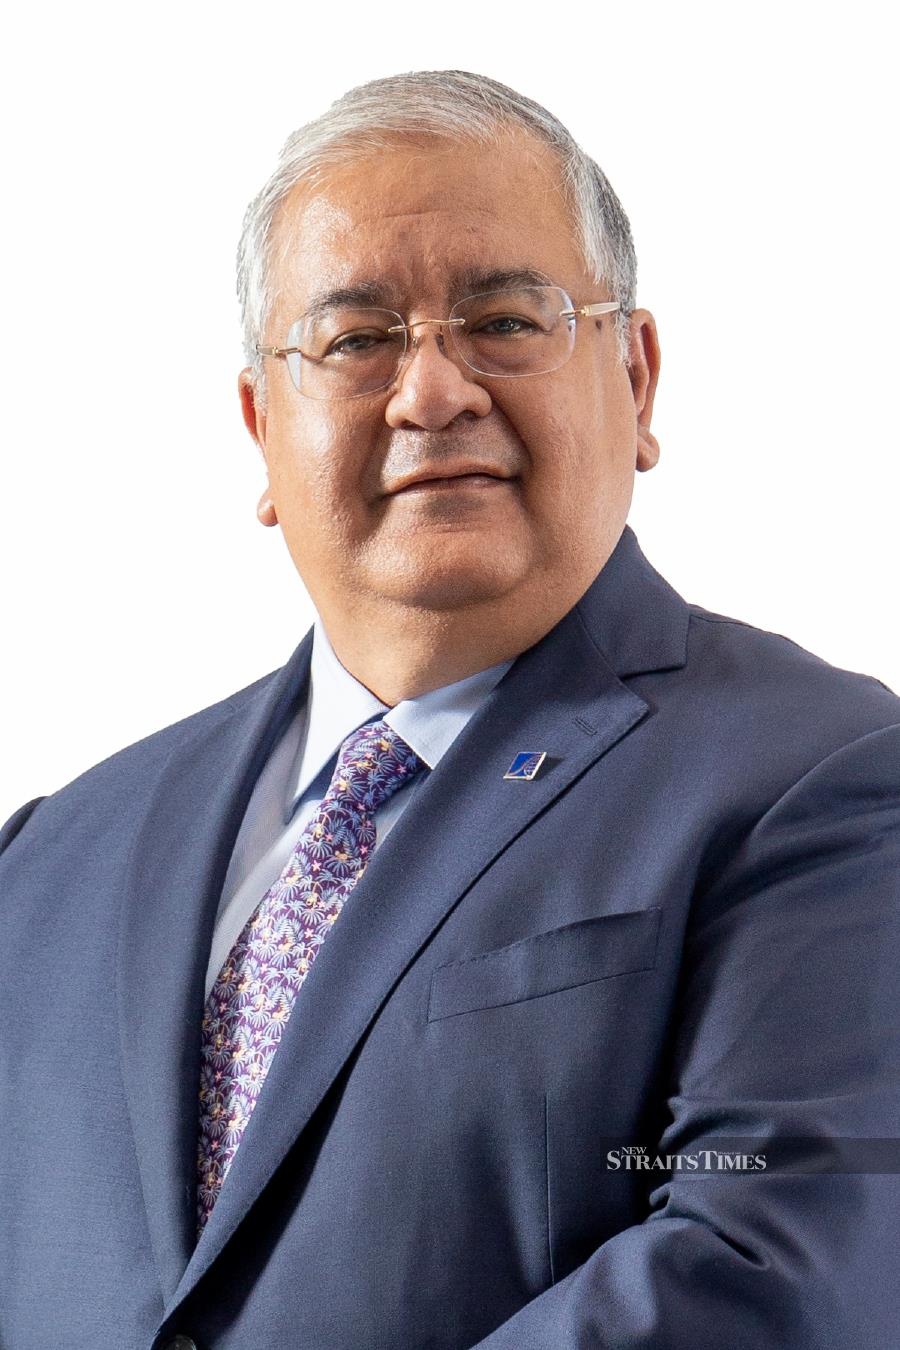 The Securities Commission Malaysia (SC) executive chairman Datuk Seri Dr. Awang Adek Hussin will retire with effect from June 15, 2024 and be replaced by Datuk Mohammad Faiz Azmi Mohammad Azmi.